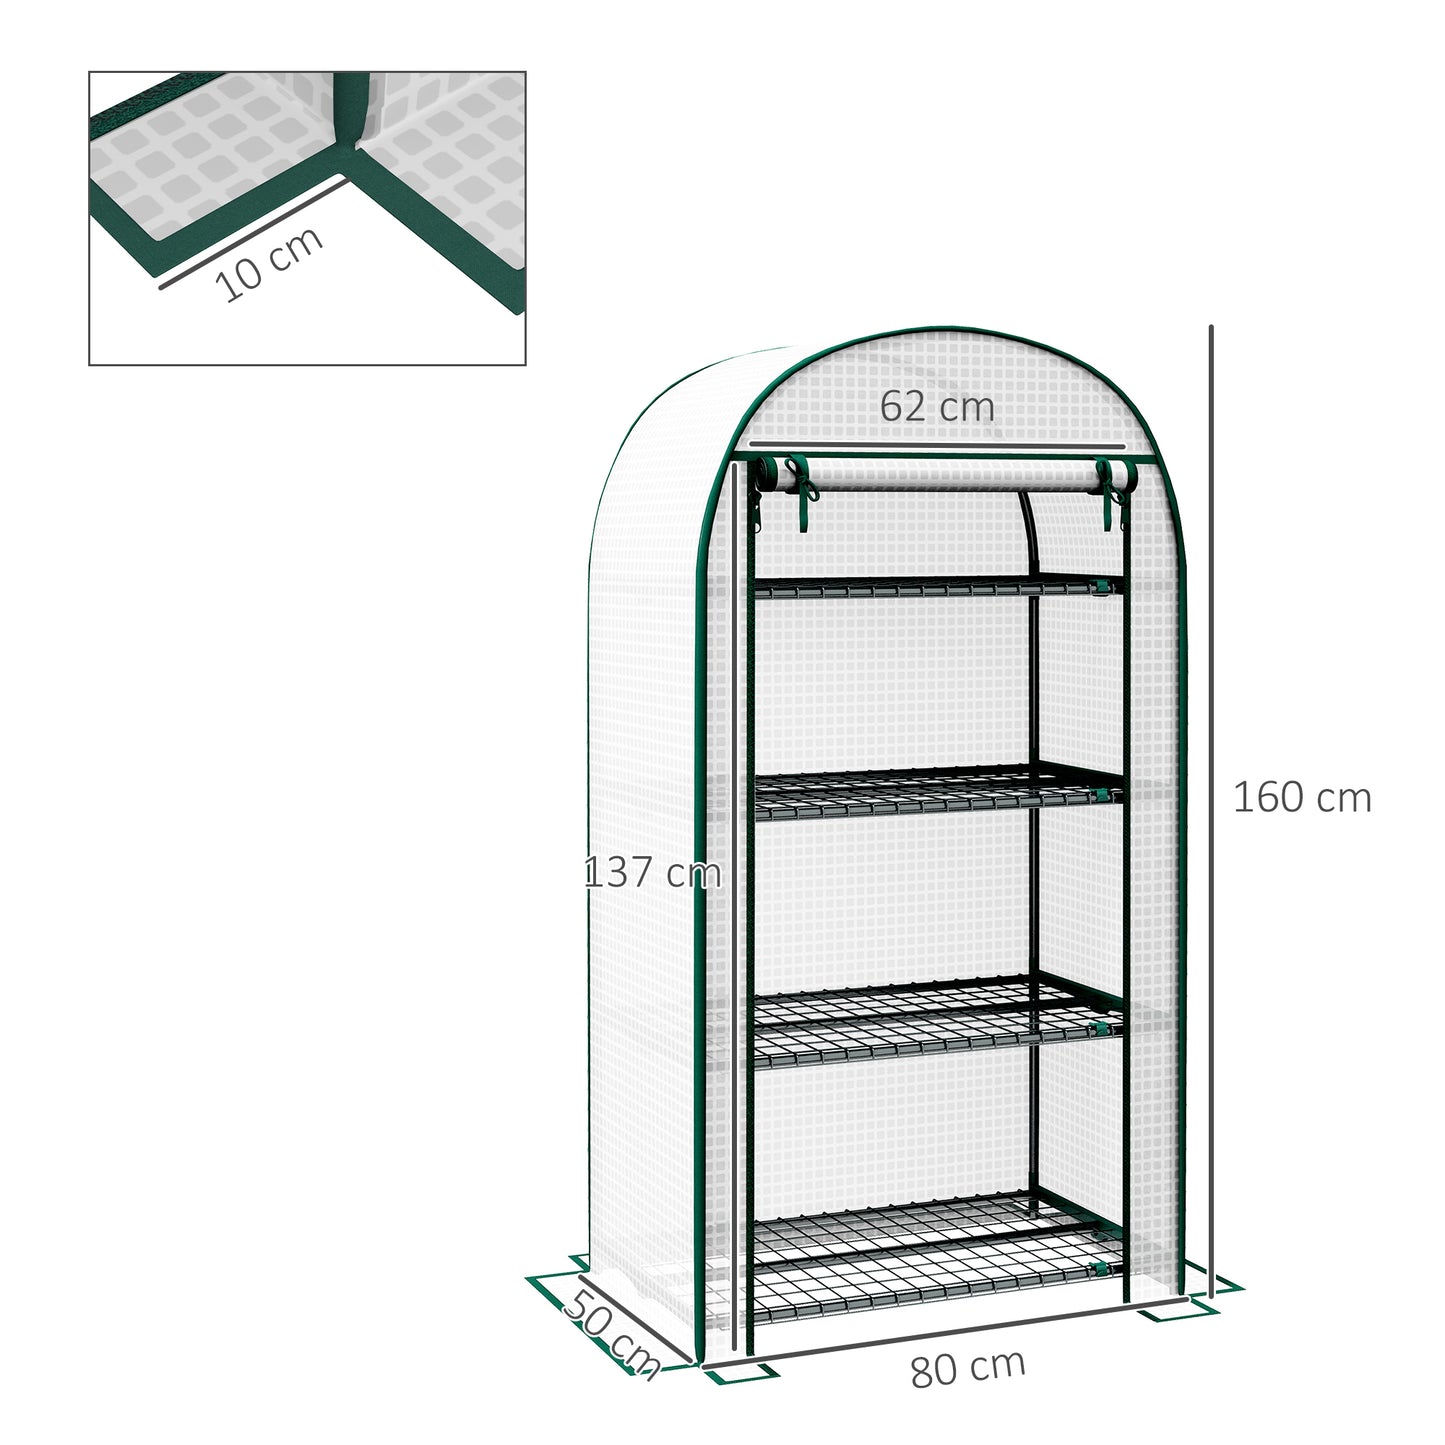 Outsunny 80 x 49 x 160cm Mini Greenhouse for Outdoor, Portable Garden Plant Green House w/ Storage Shelf, Roll-Up Zippered Door, Metal Frame